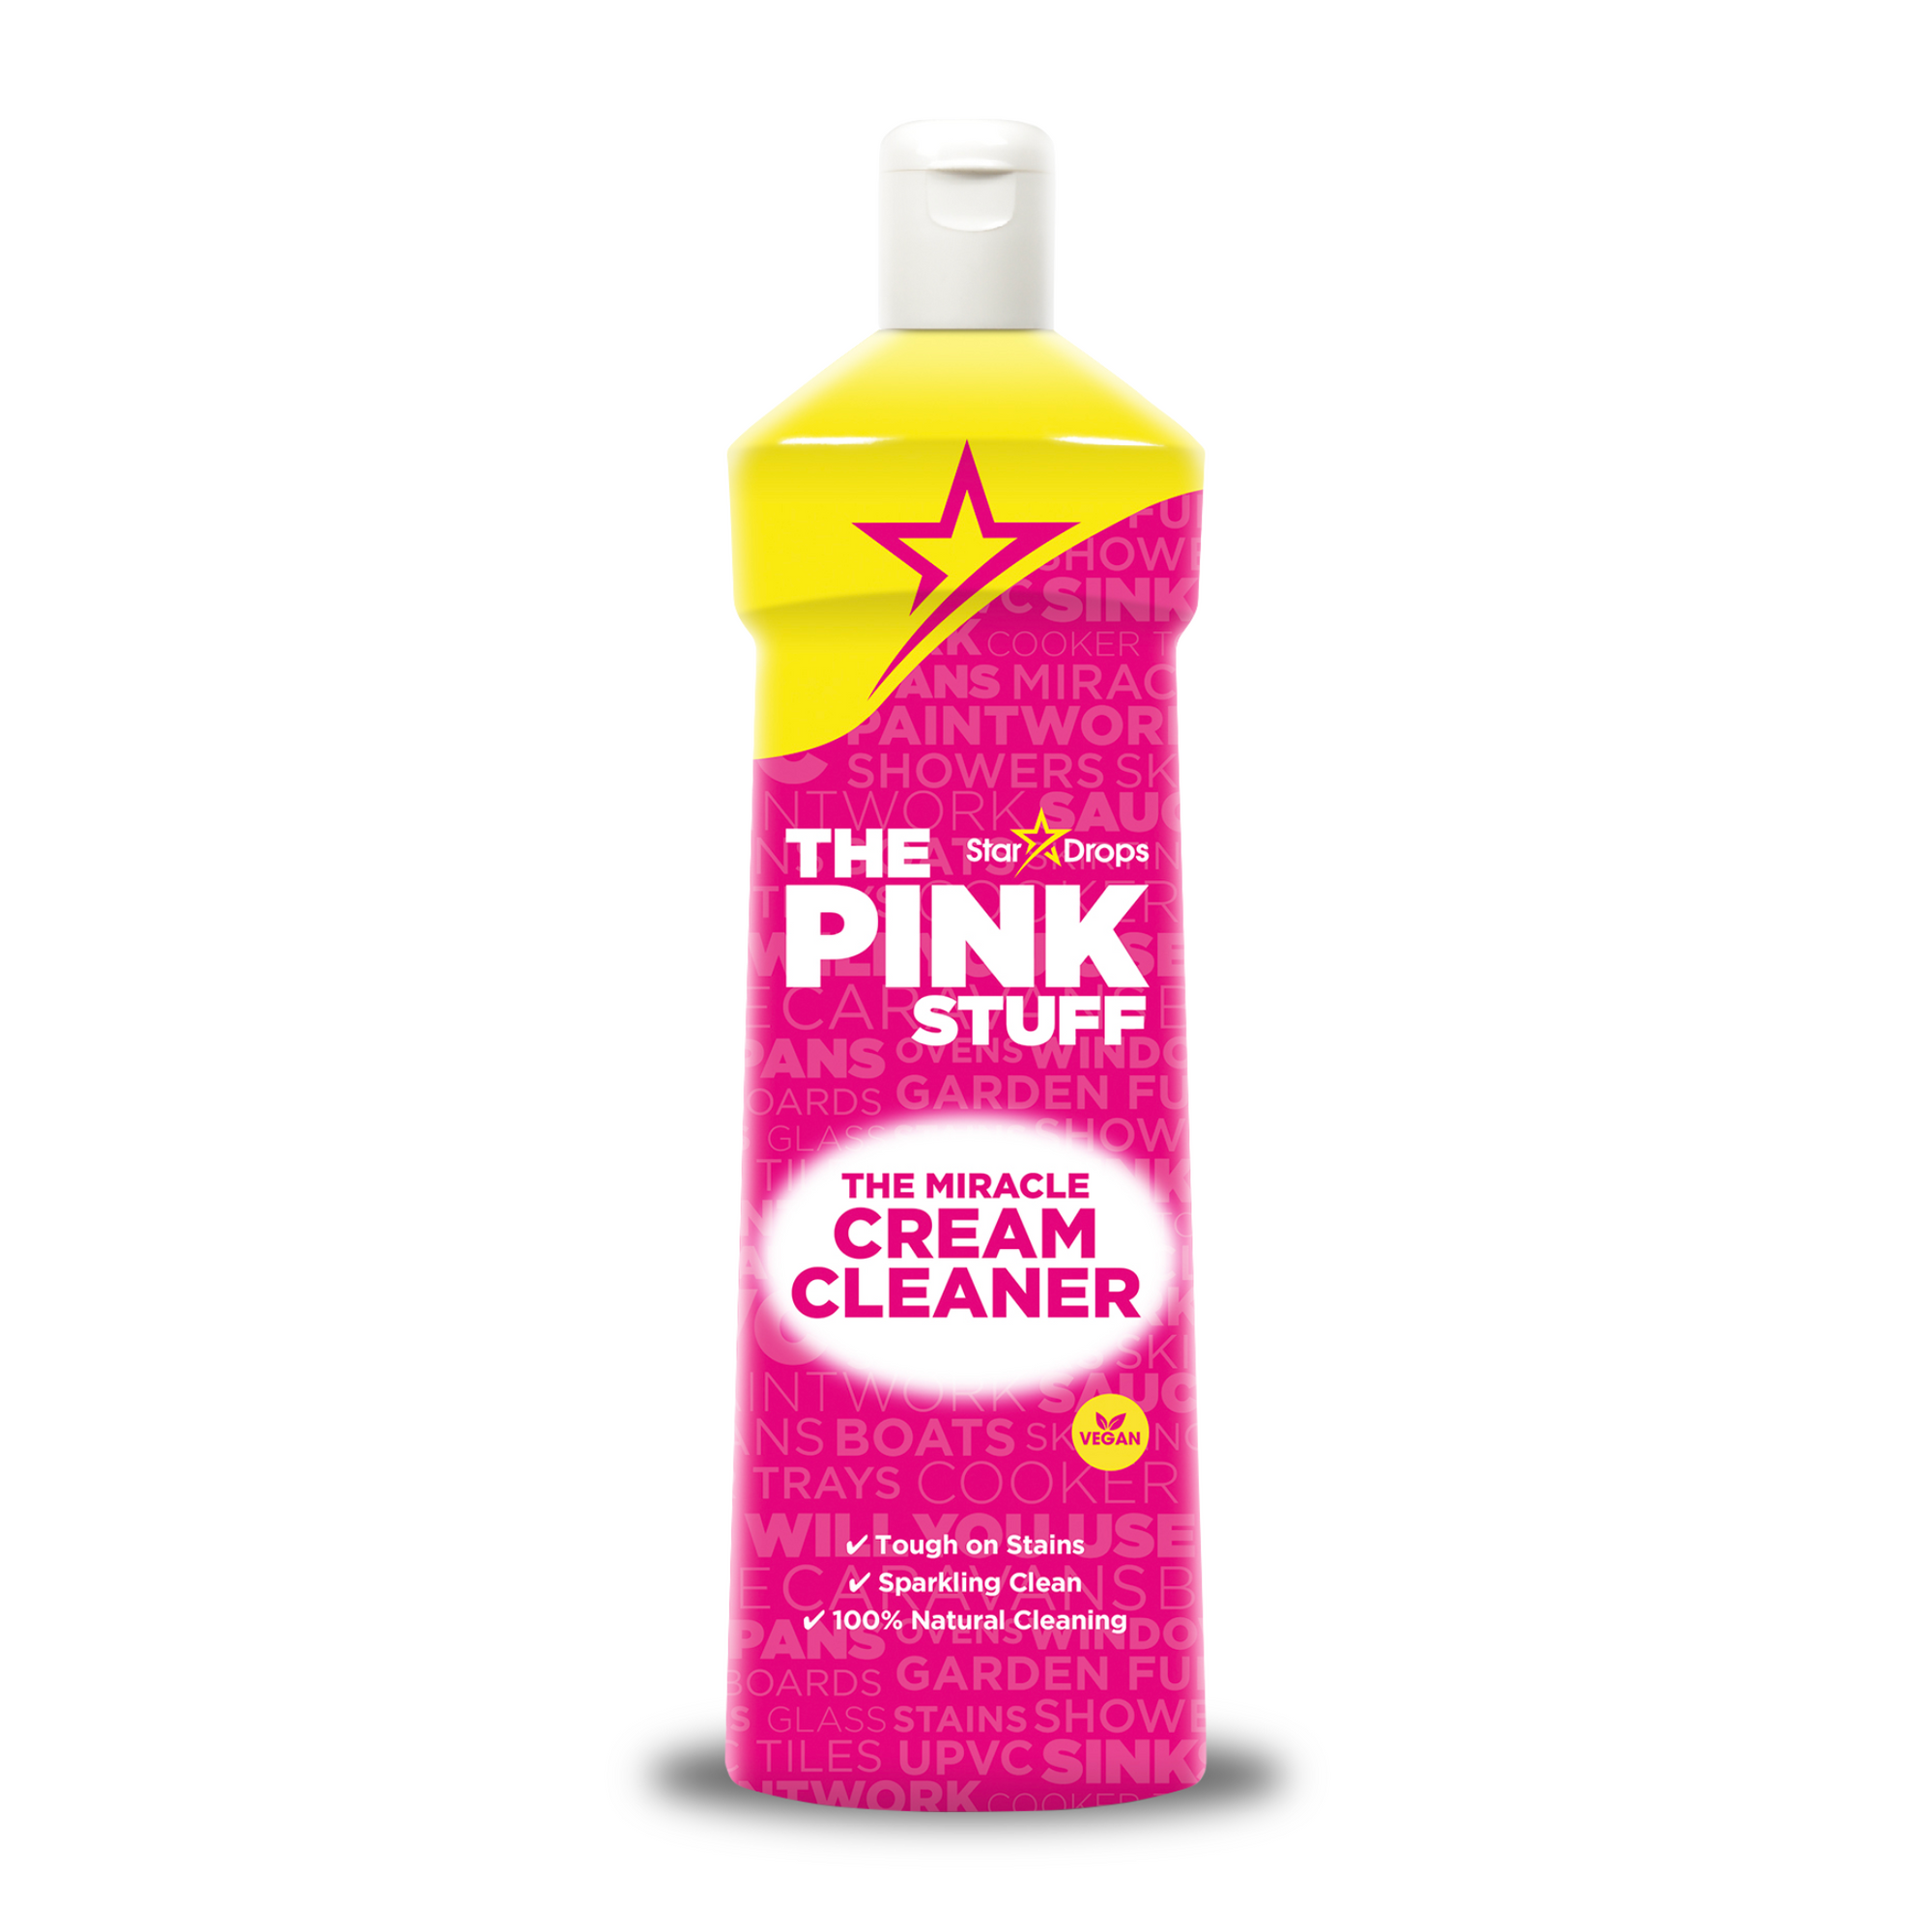 The Pink Stuff - The Miracle Cream Cleaner (500ml)